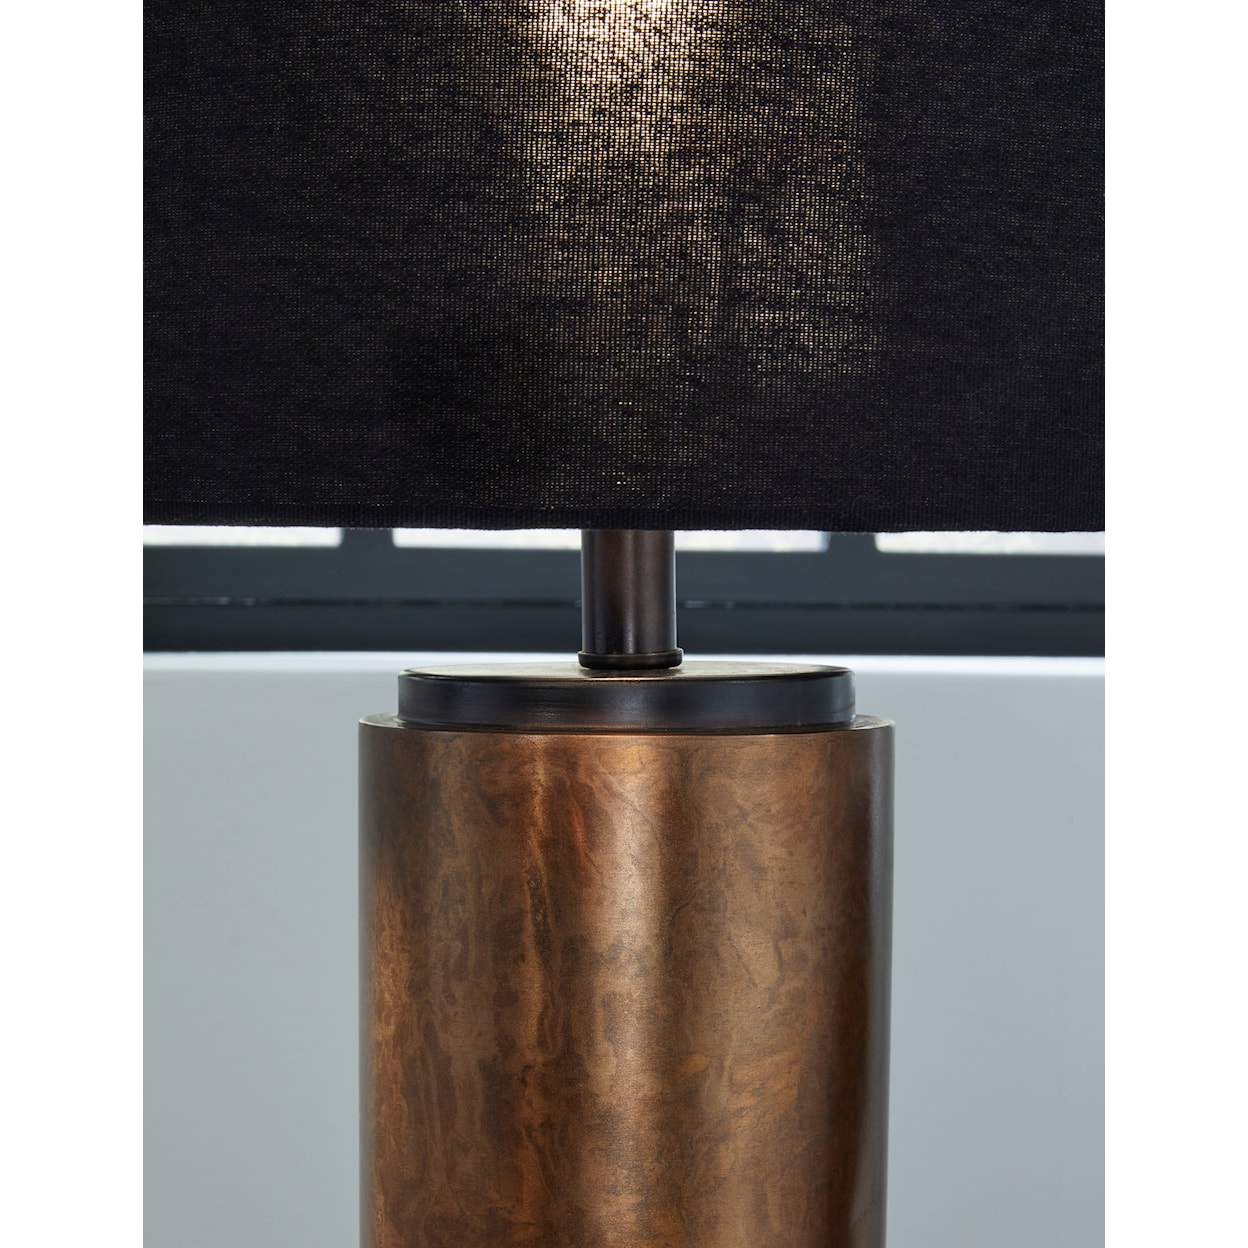 Signature Design Lamps - Contemporary Hildry Table Lamp